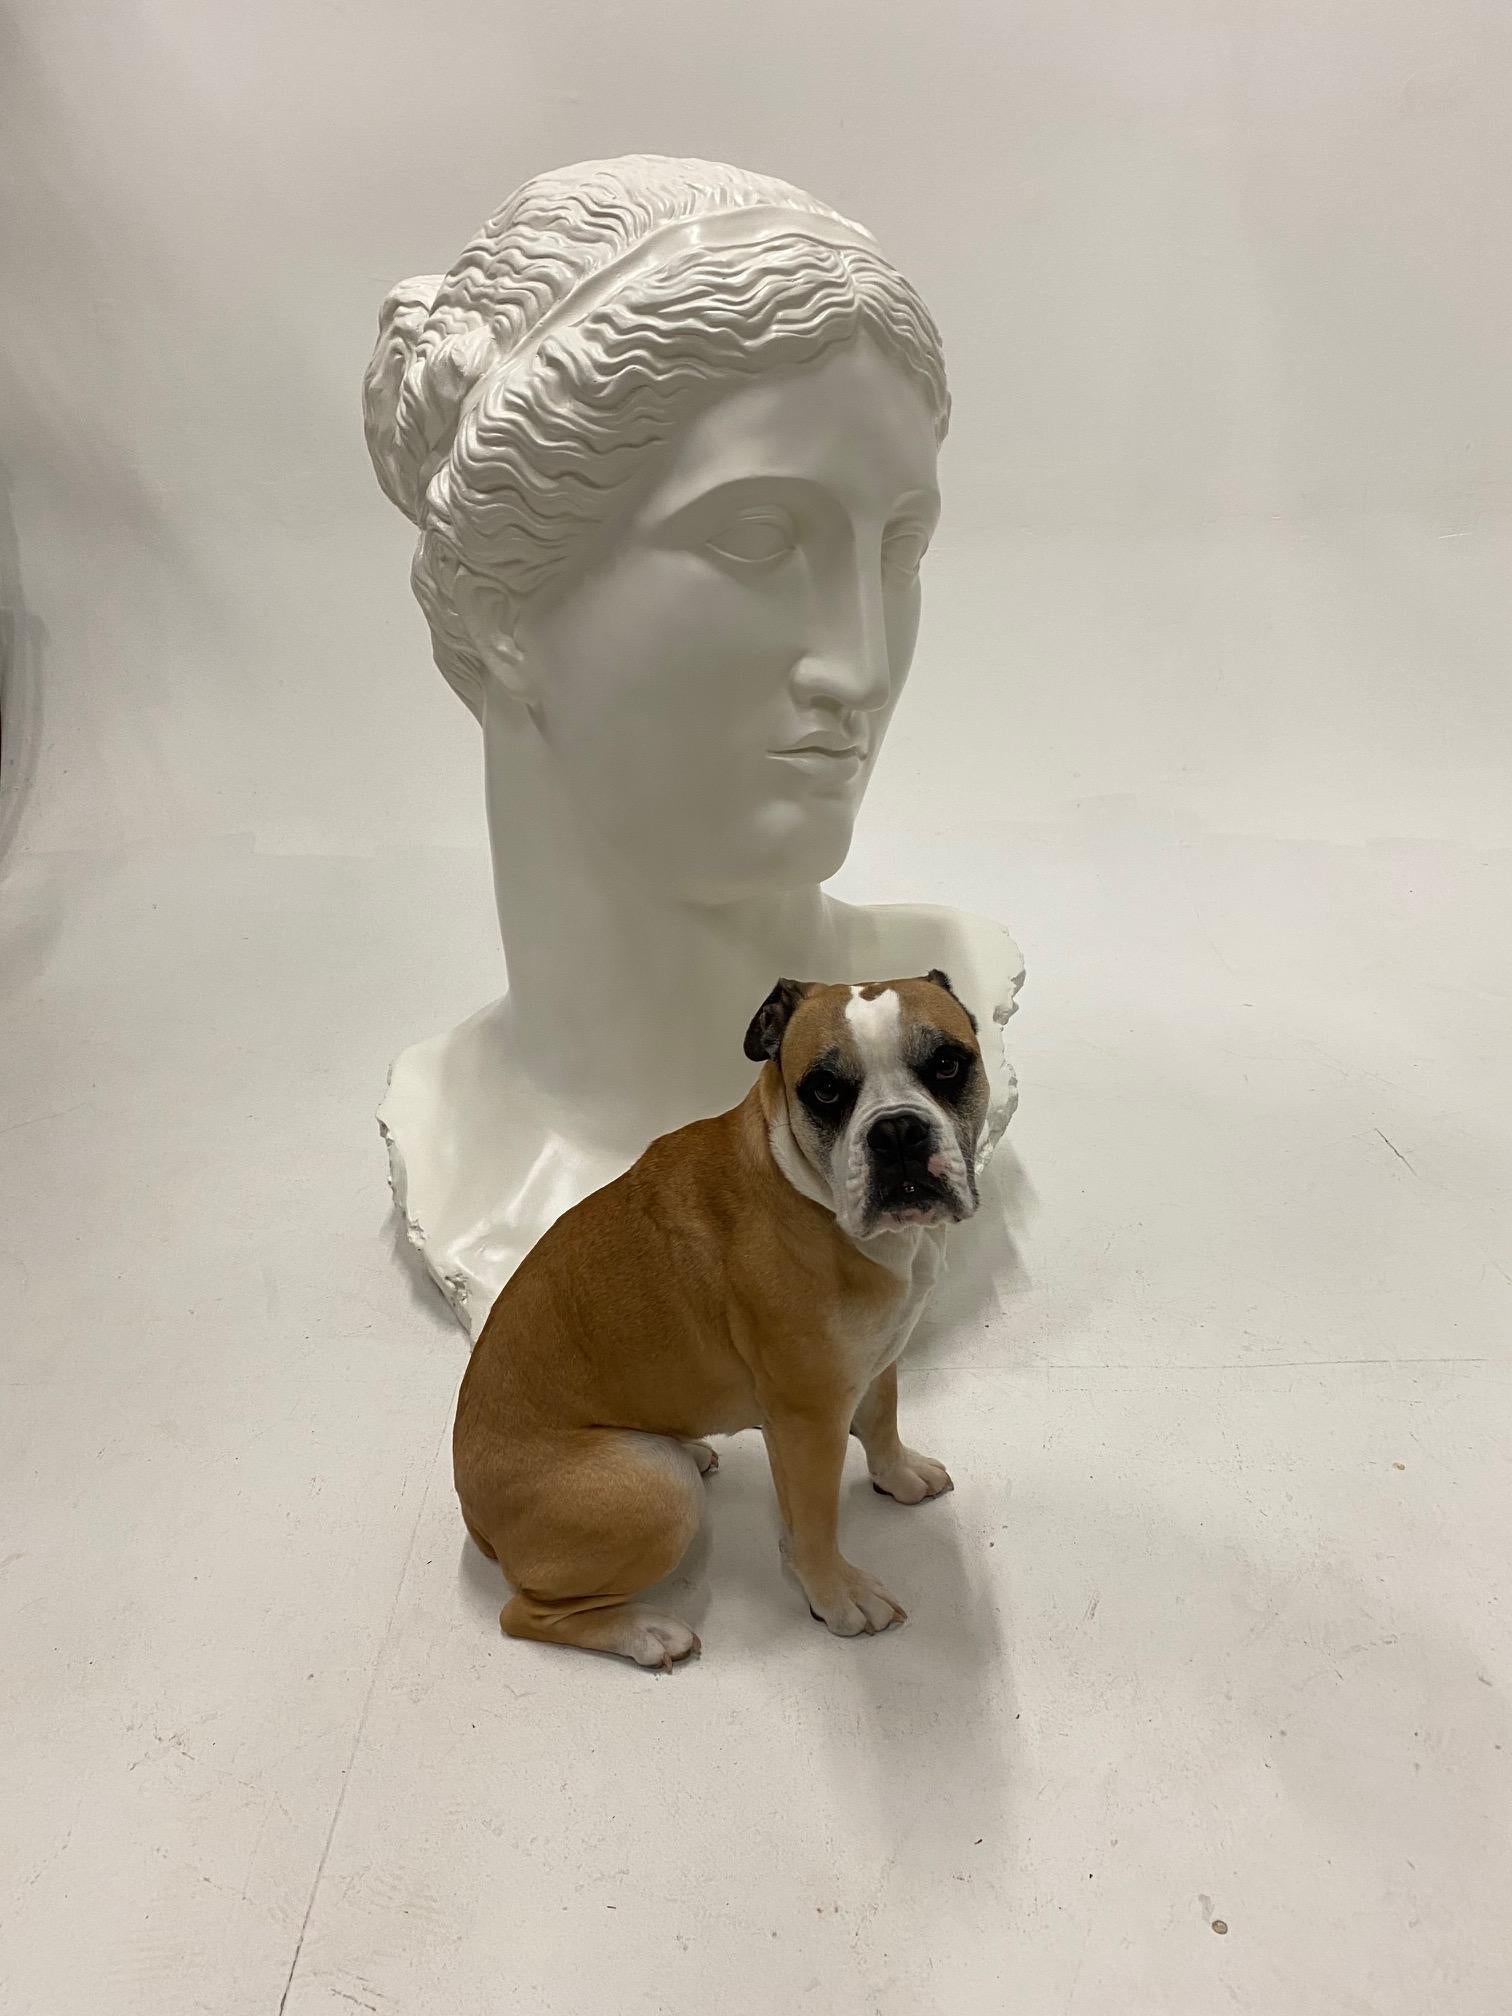 Impressive in scale monumental bust of Diana made of fiberglass, recently refreshed with white paint.